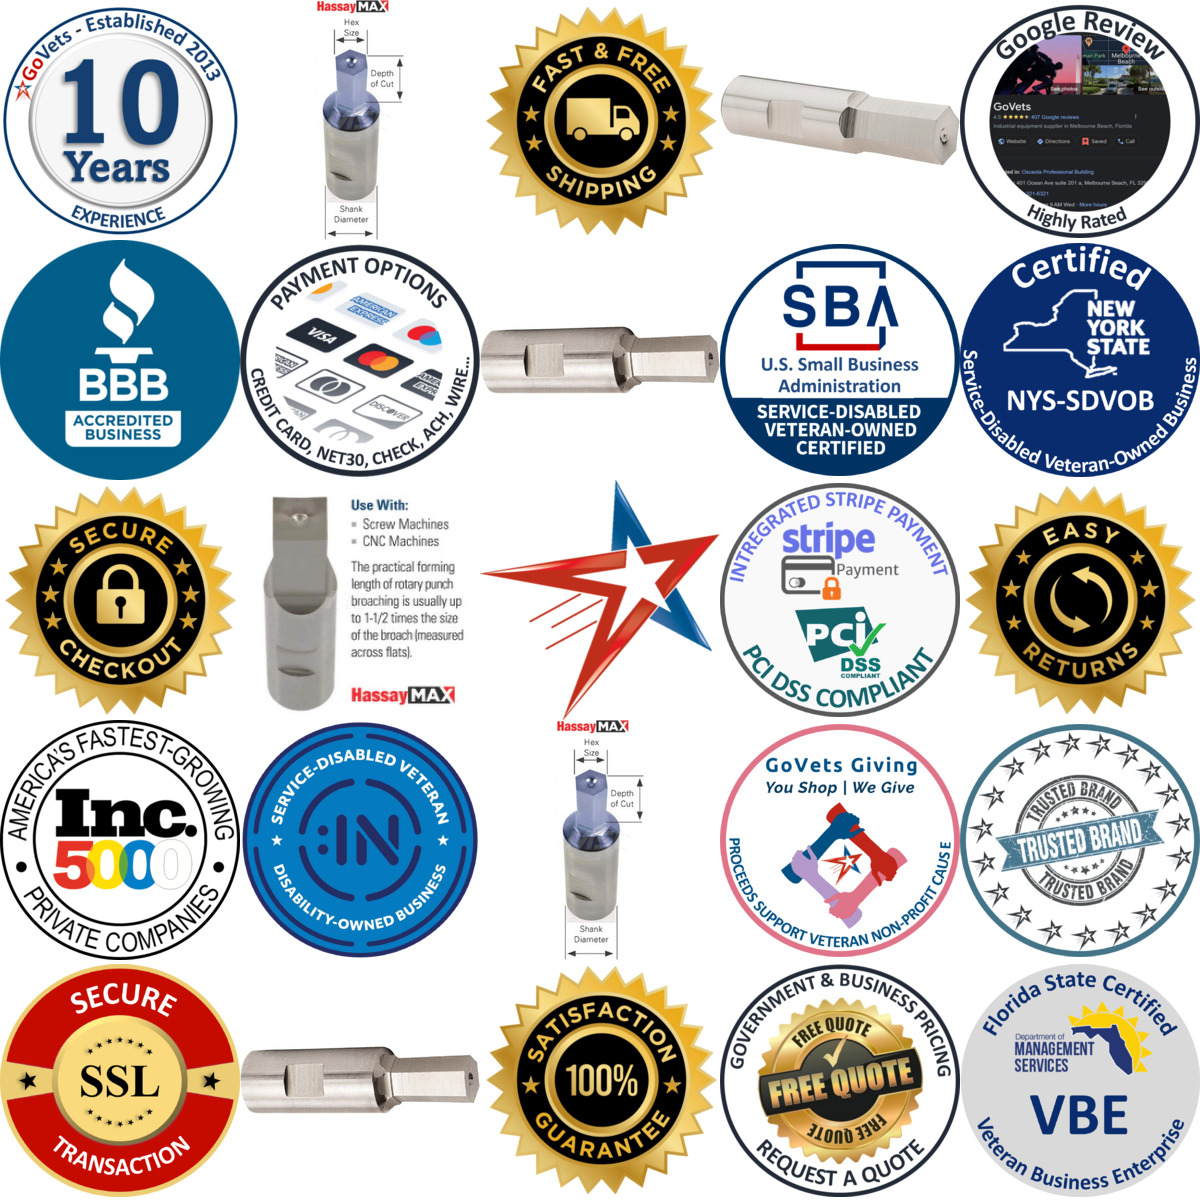 A selection of Rotary Broaches products on GoVets